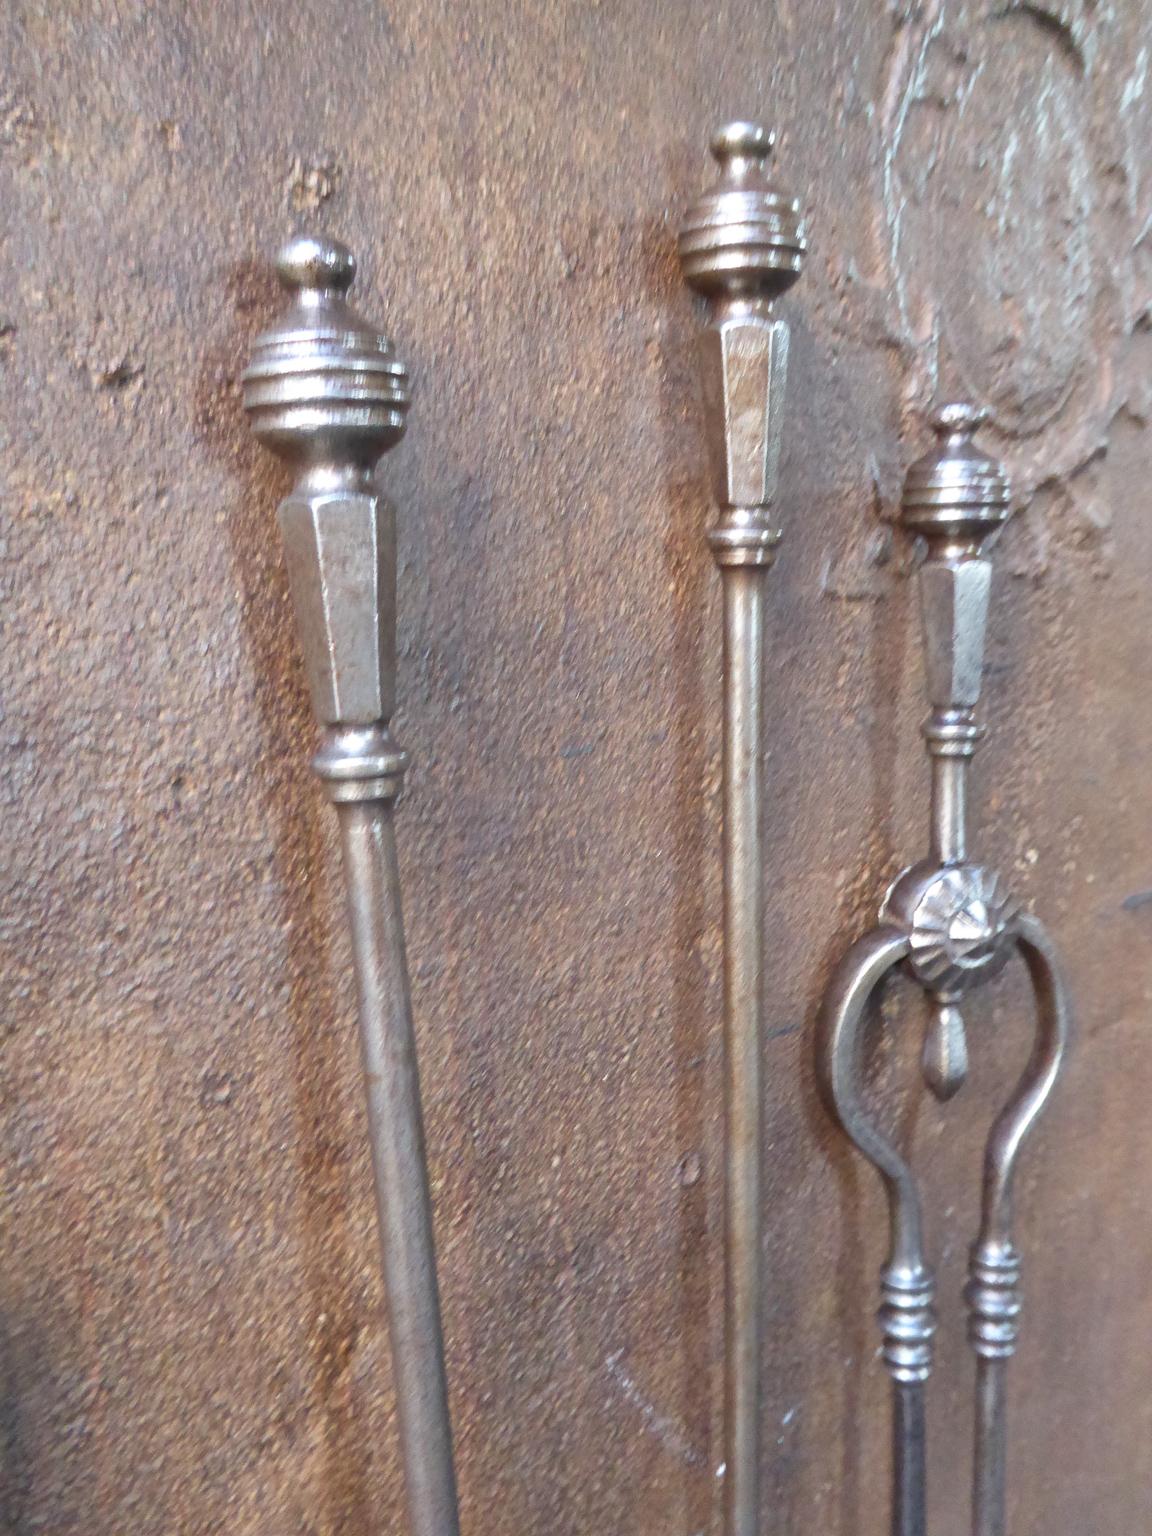 Forged Victorian Fireplace Tools or Fire Irons, 19th Century, English